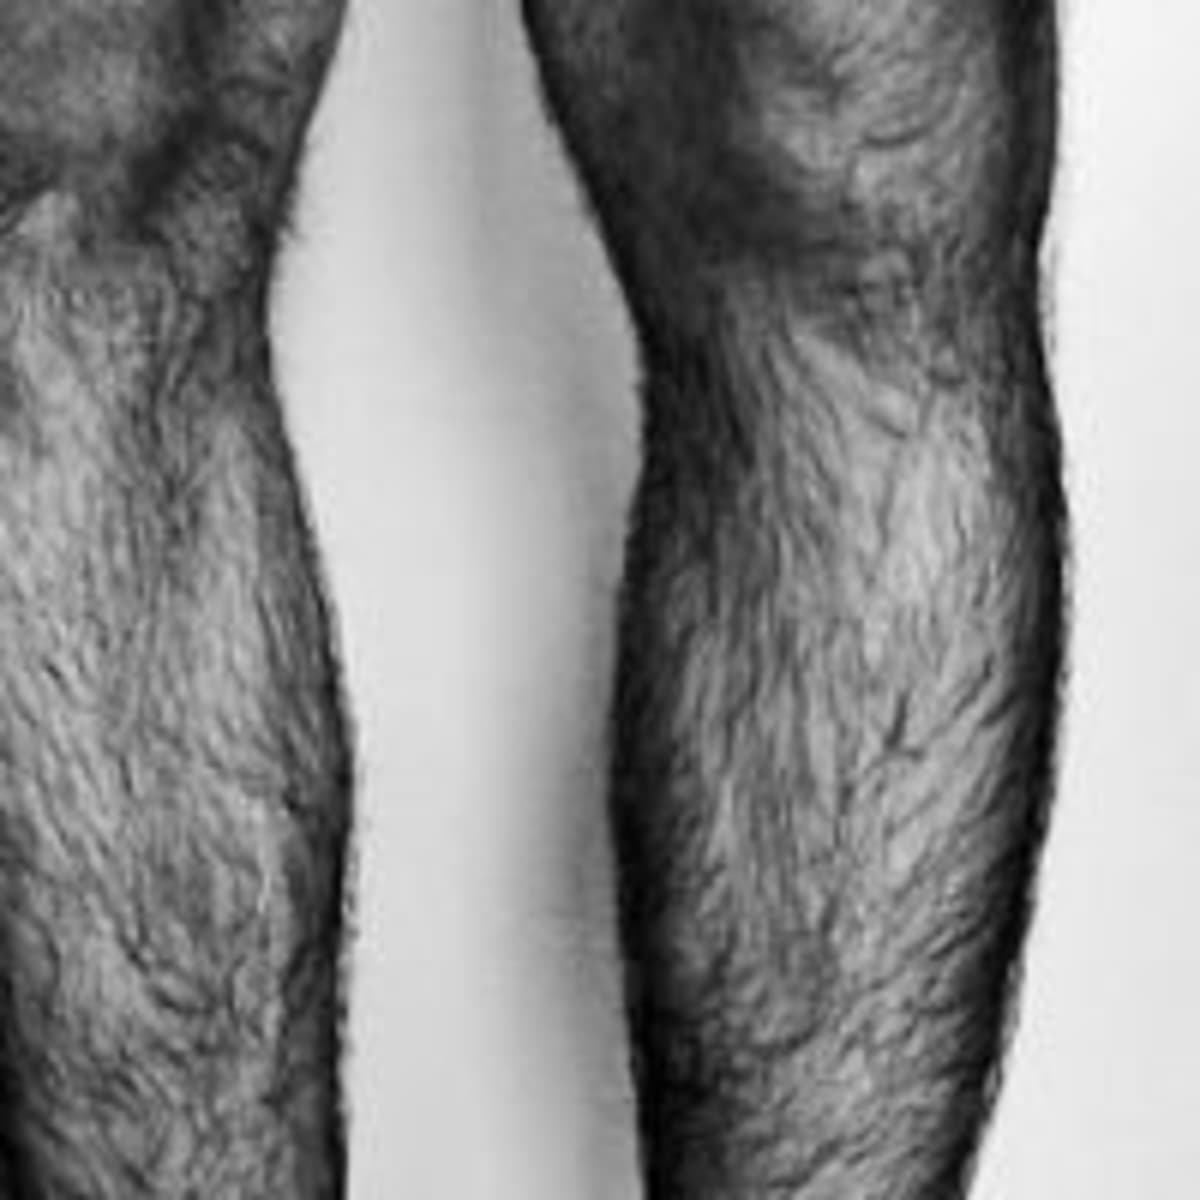 Twinks with hairy legs